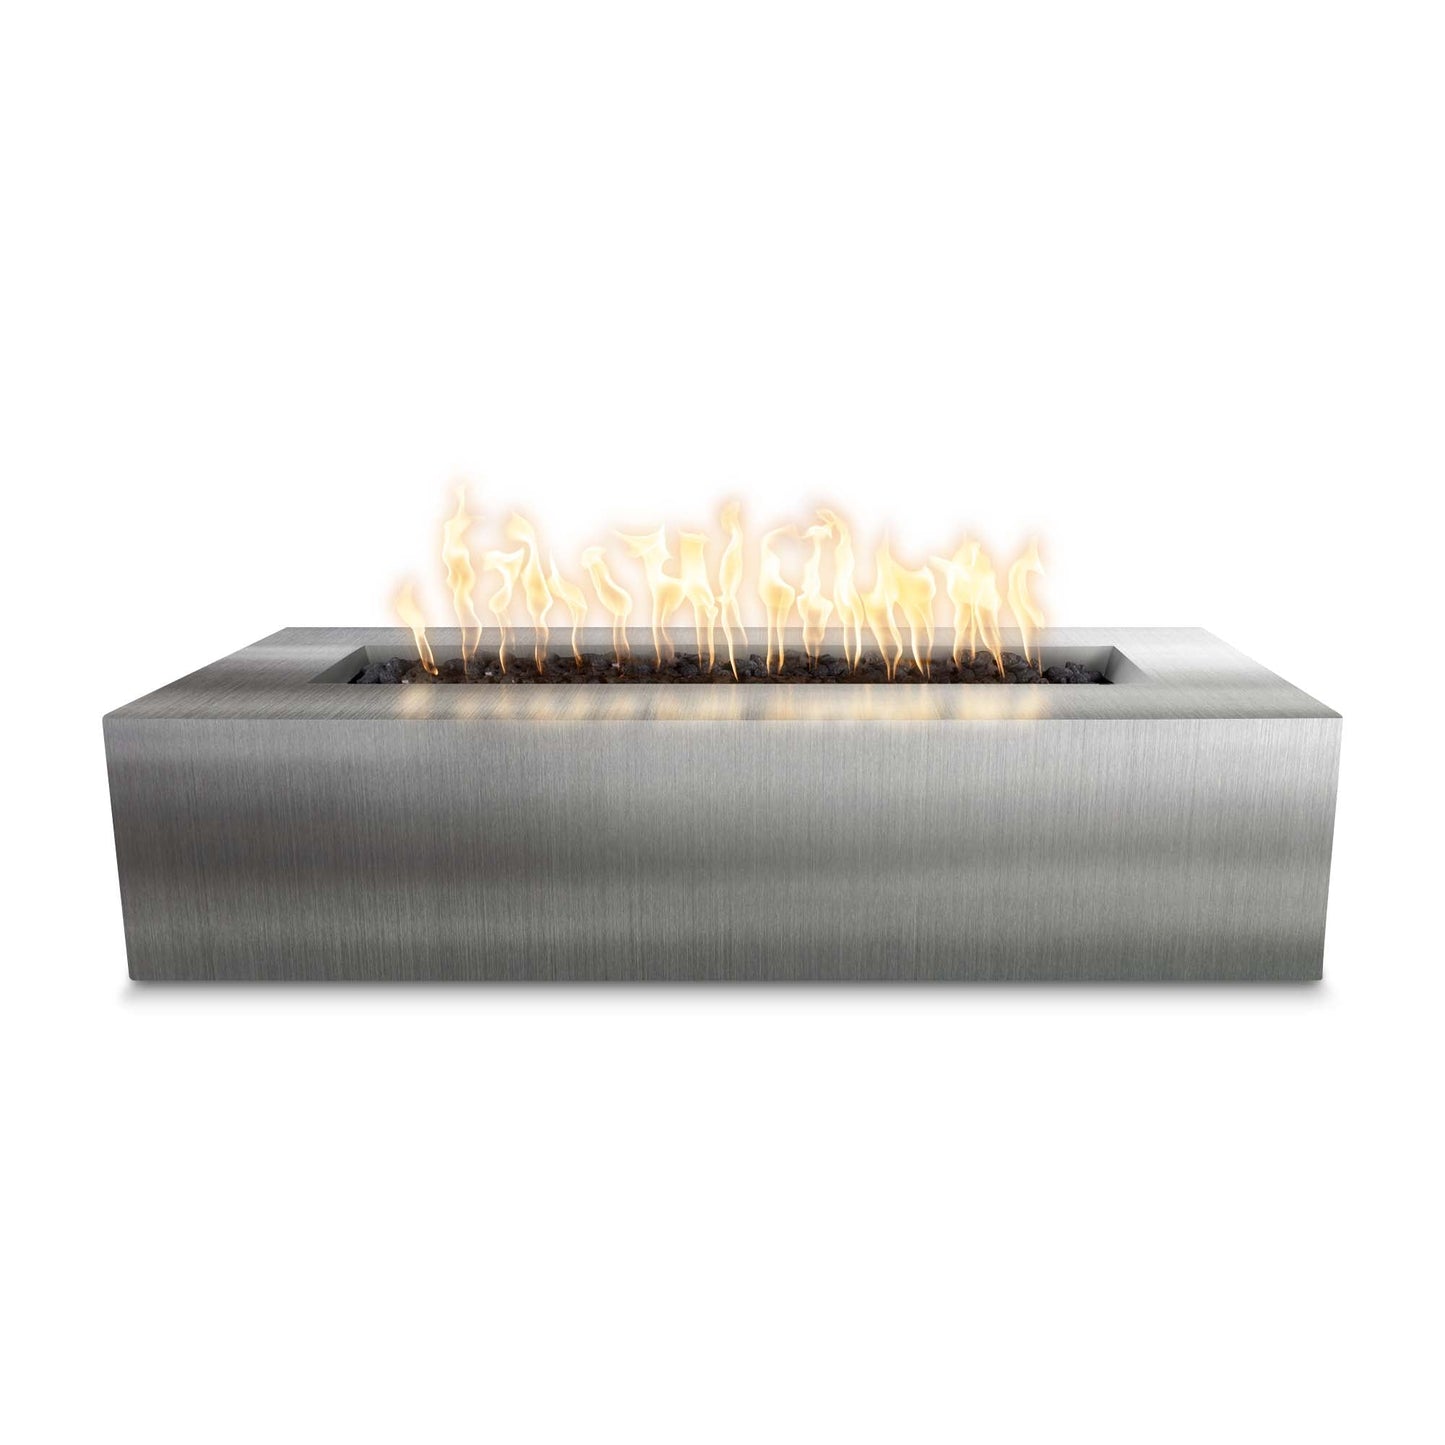 The Outdoor Plus Rectangular Regal 60" Corten Steel Natural Gas Fire Pit with 12V Electronic Ignition